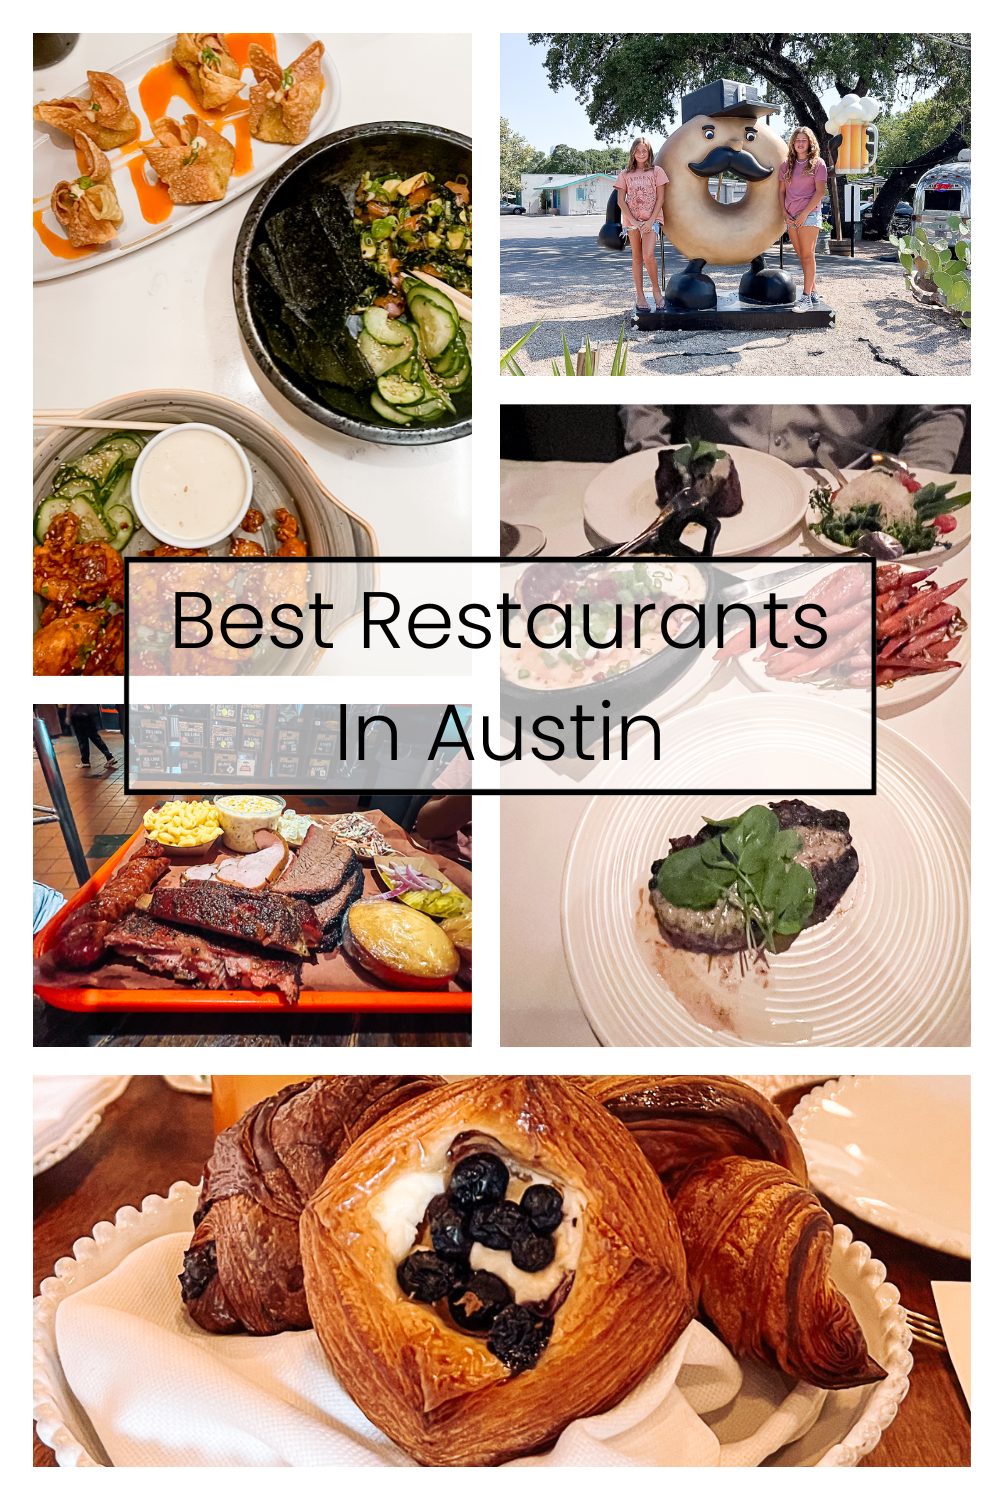 Pacific Globetrotters, budget family travel blog, shares Best Restaurants In Austin.